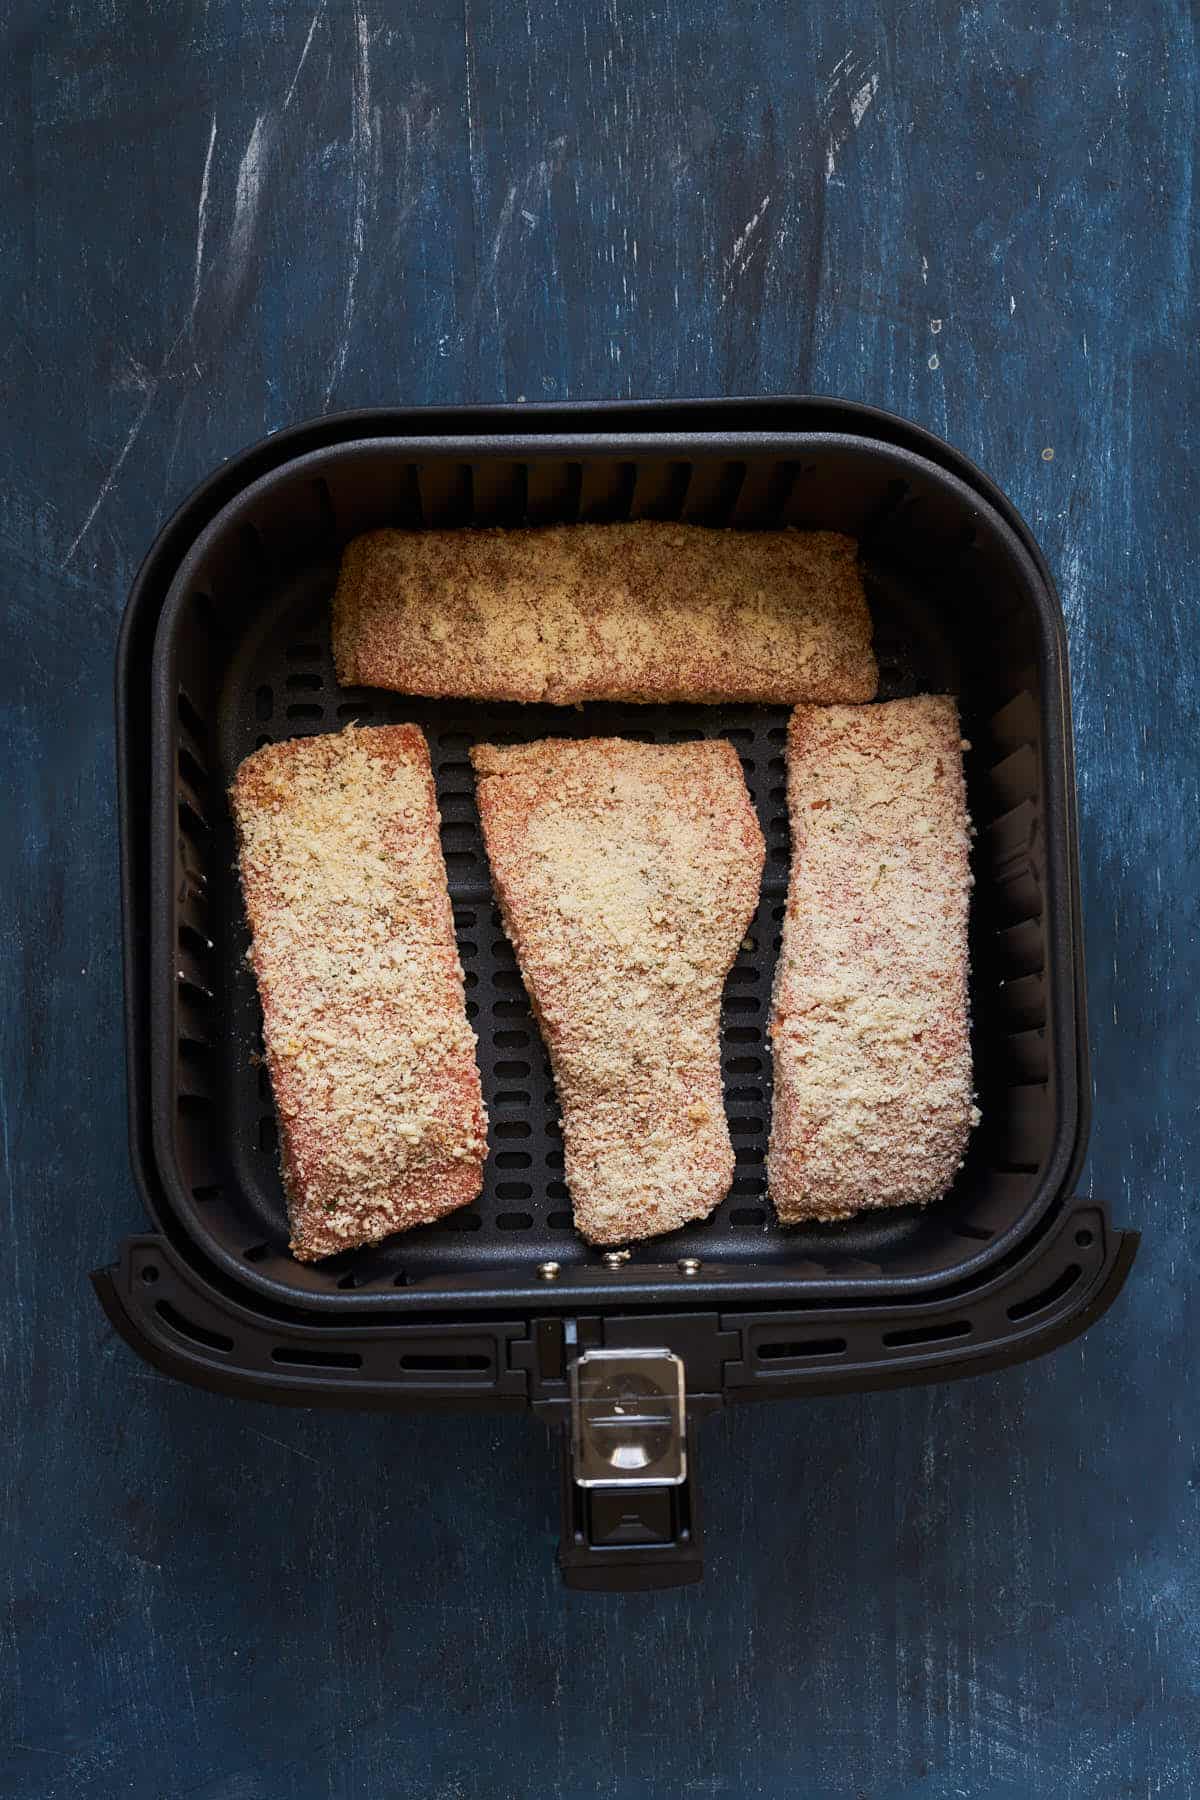 Breaded salmon in the air fryer basket before spraying with oil.